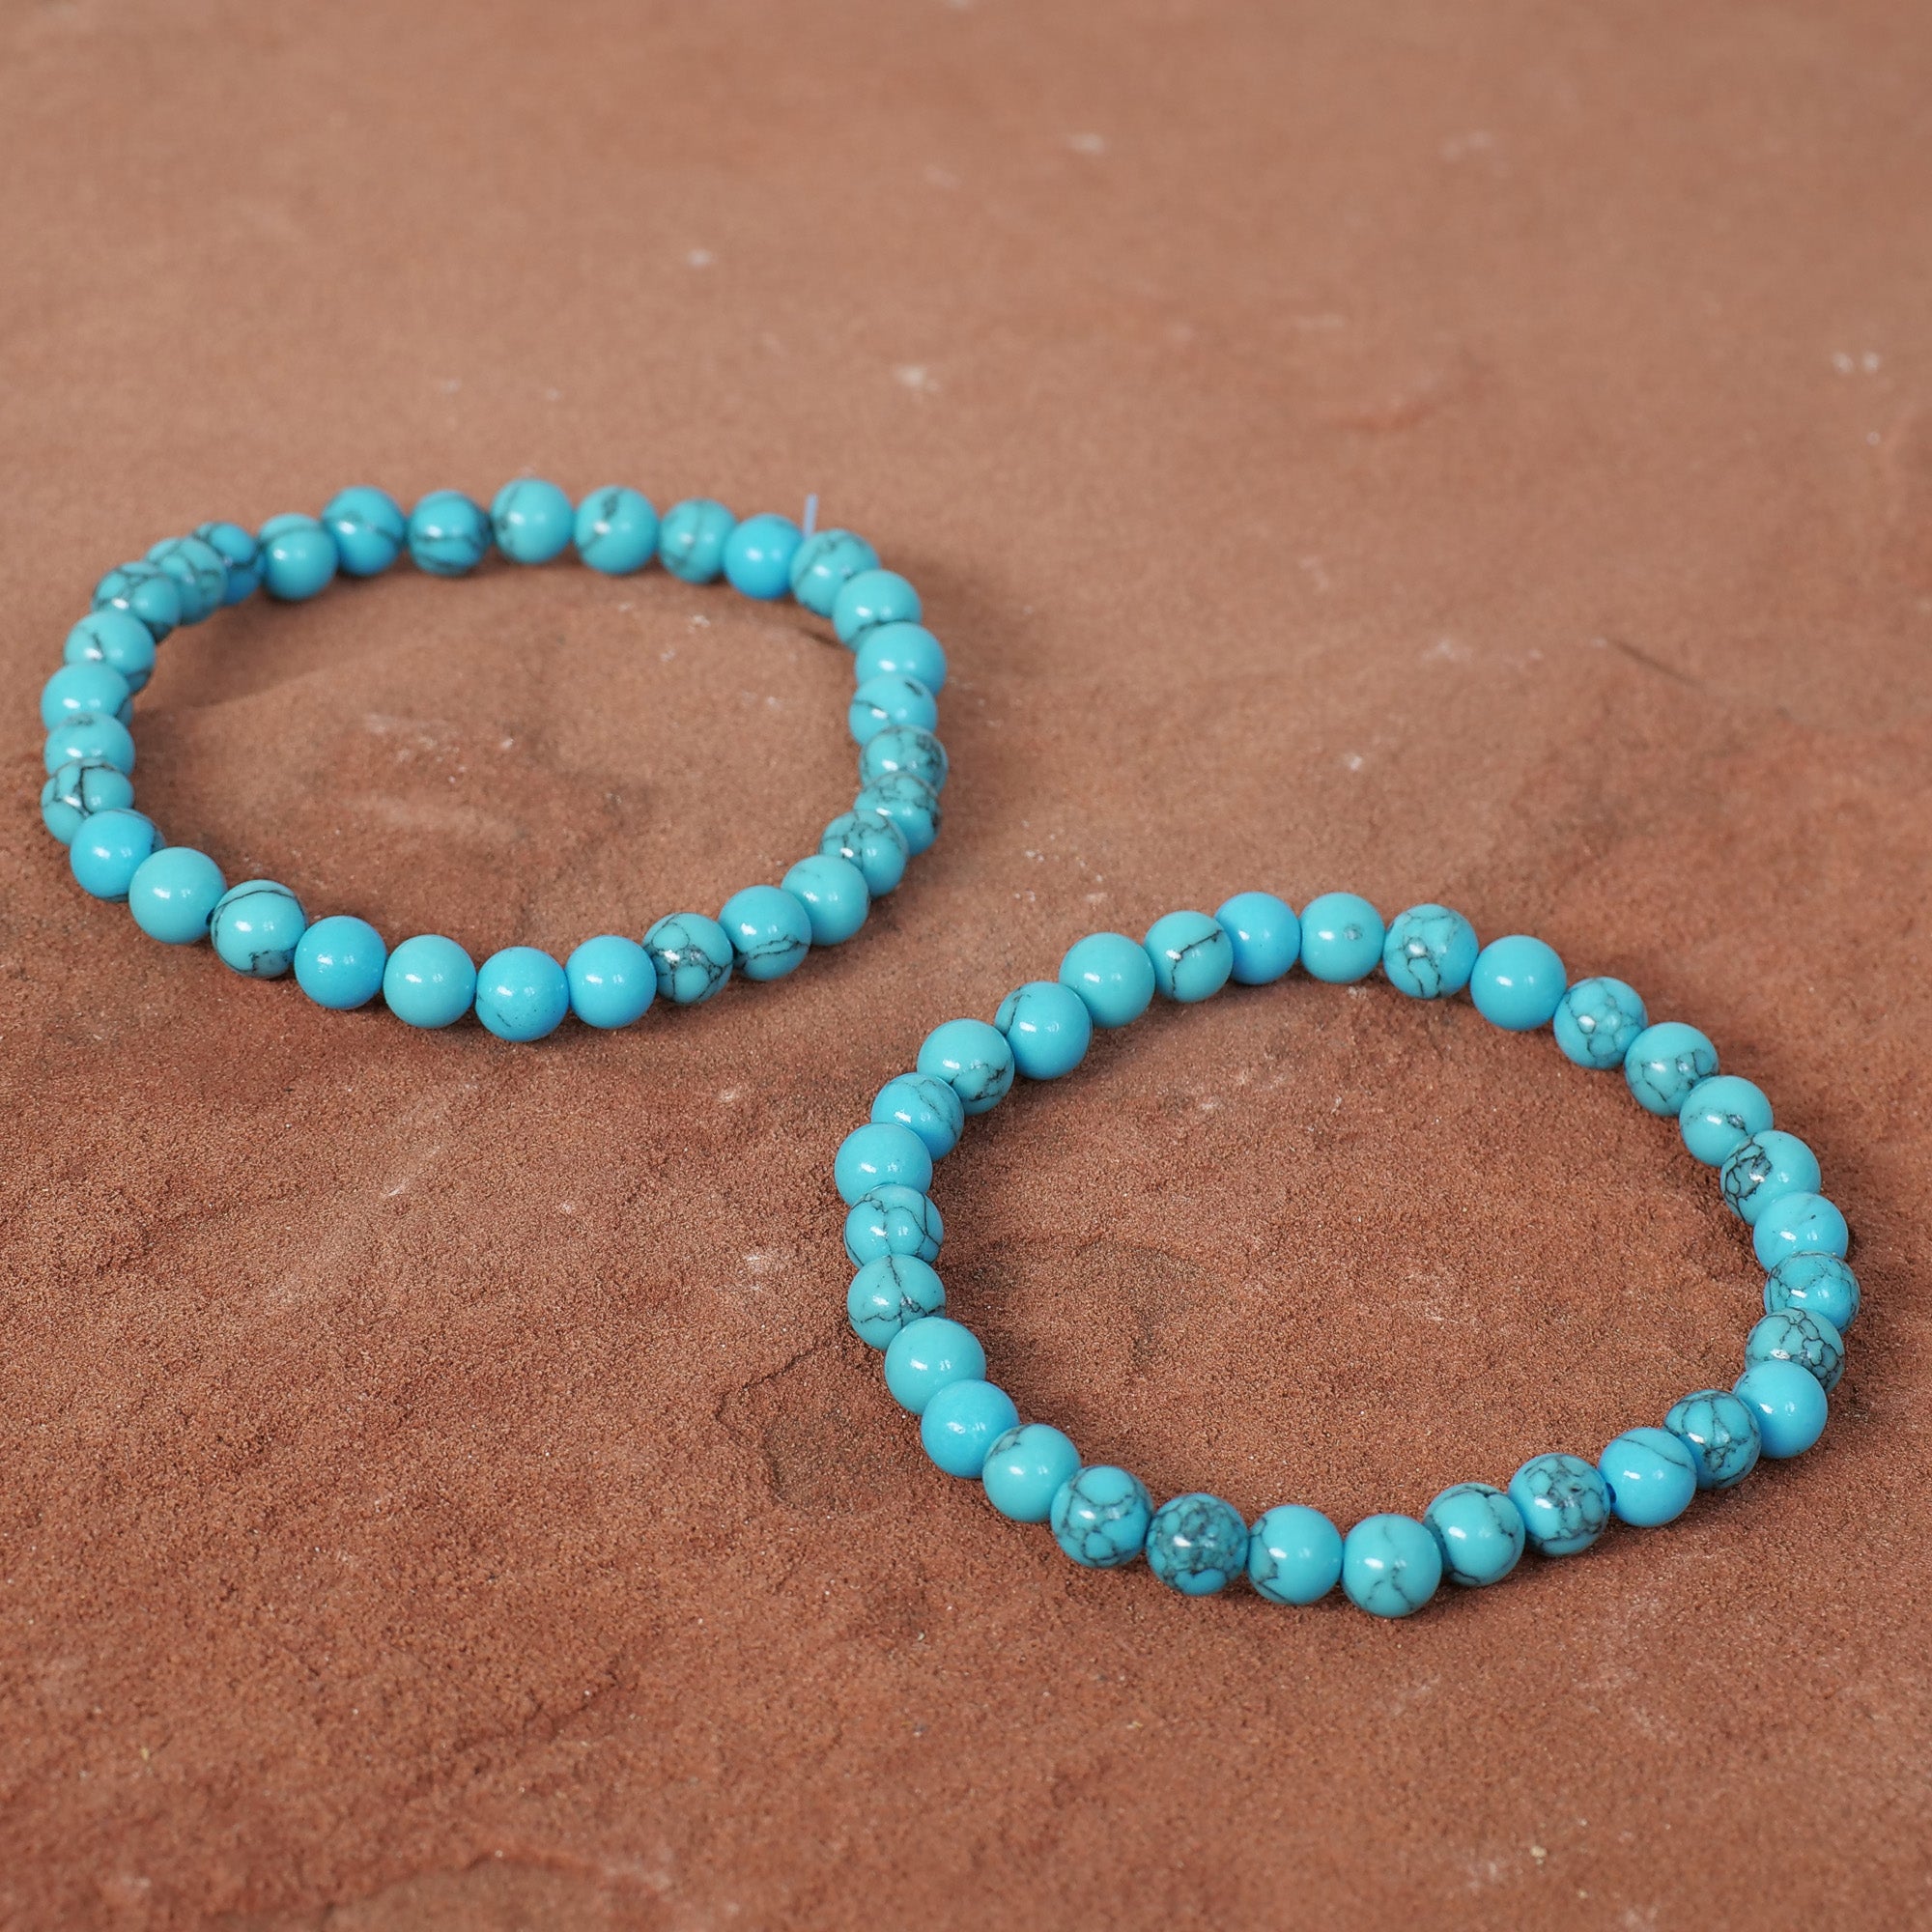 6mm Pretty Pink Howlite Stone Beads, Howlite Turquoise Beads for Jewel